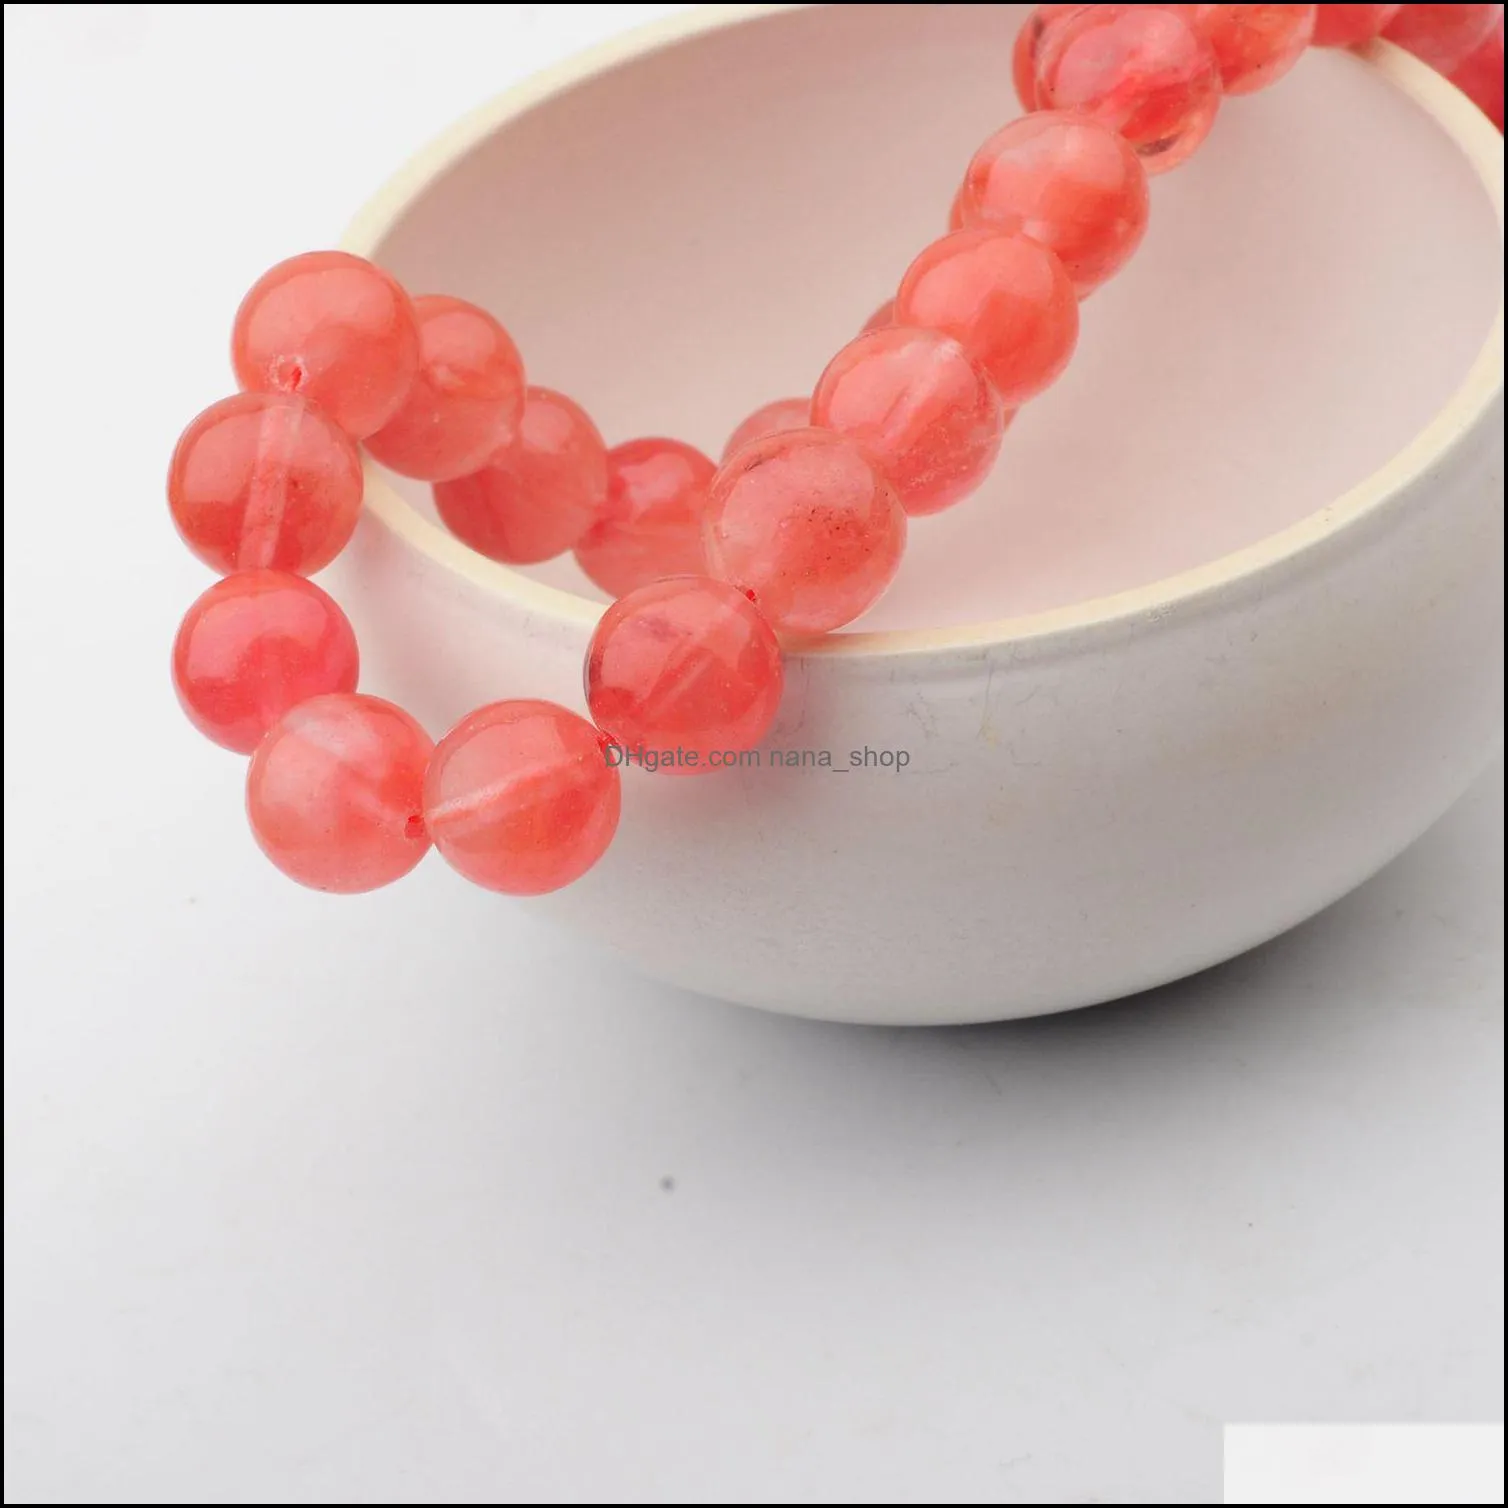 natural clear cherry quartz 14mm round beads for diy making charm jewelry necklace bracelet loose 28pcs stone beads for wholesales